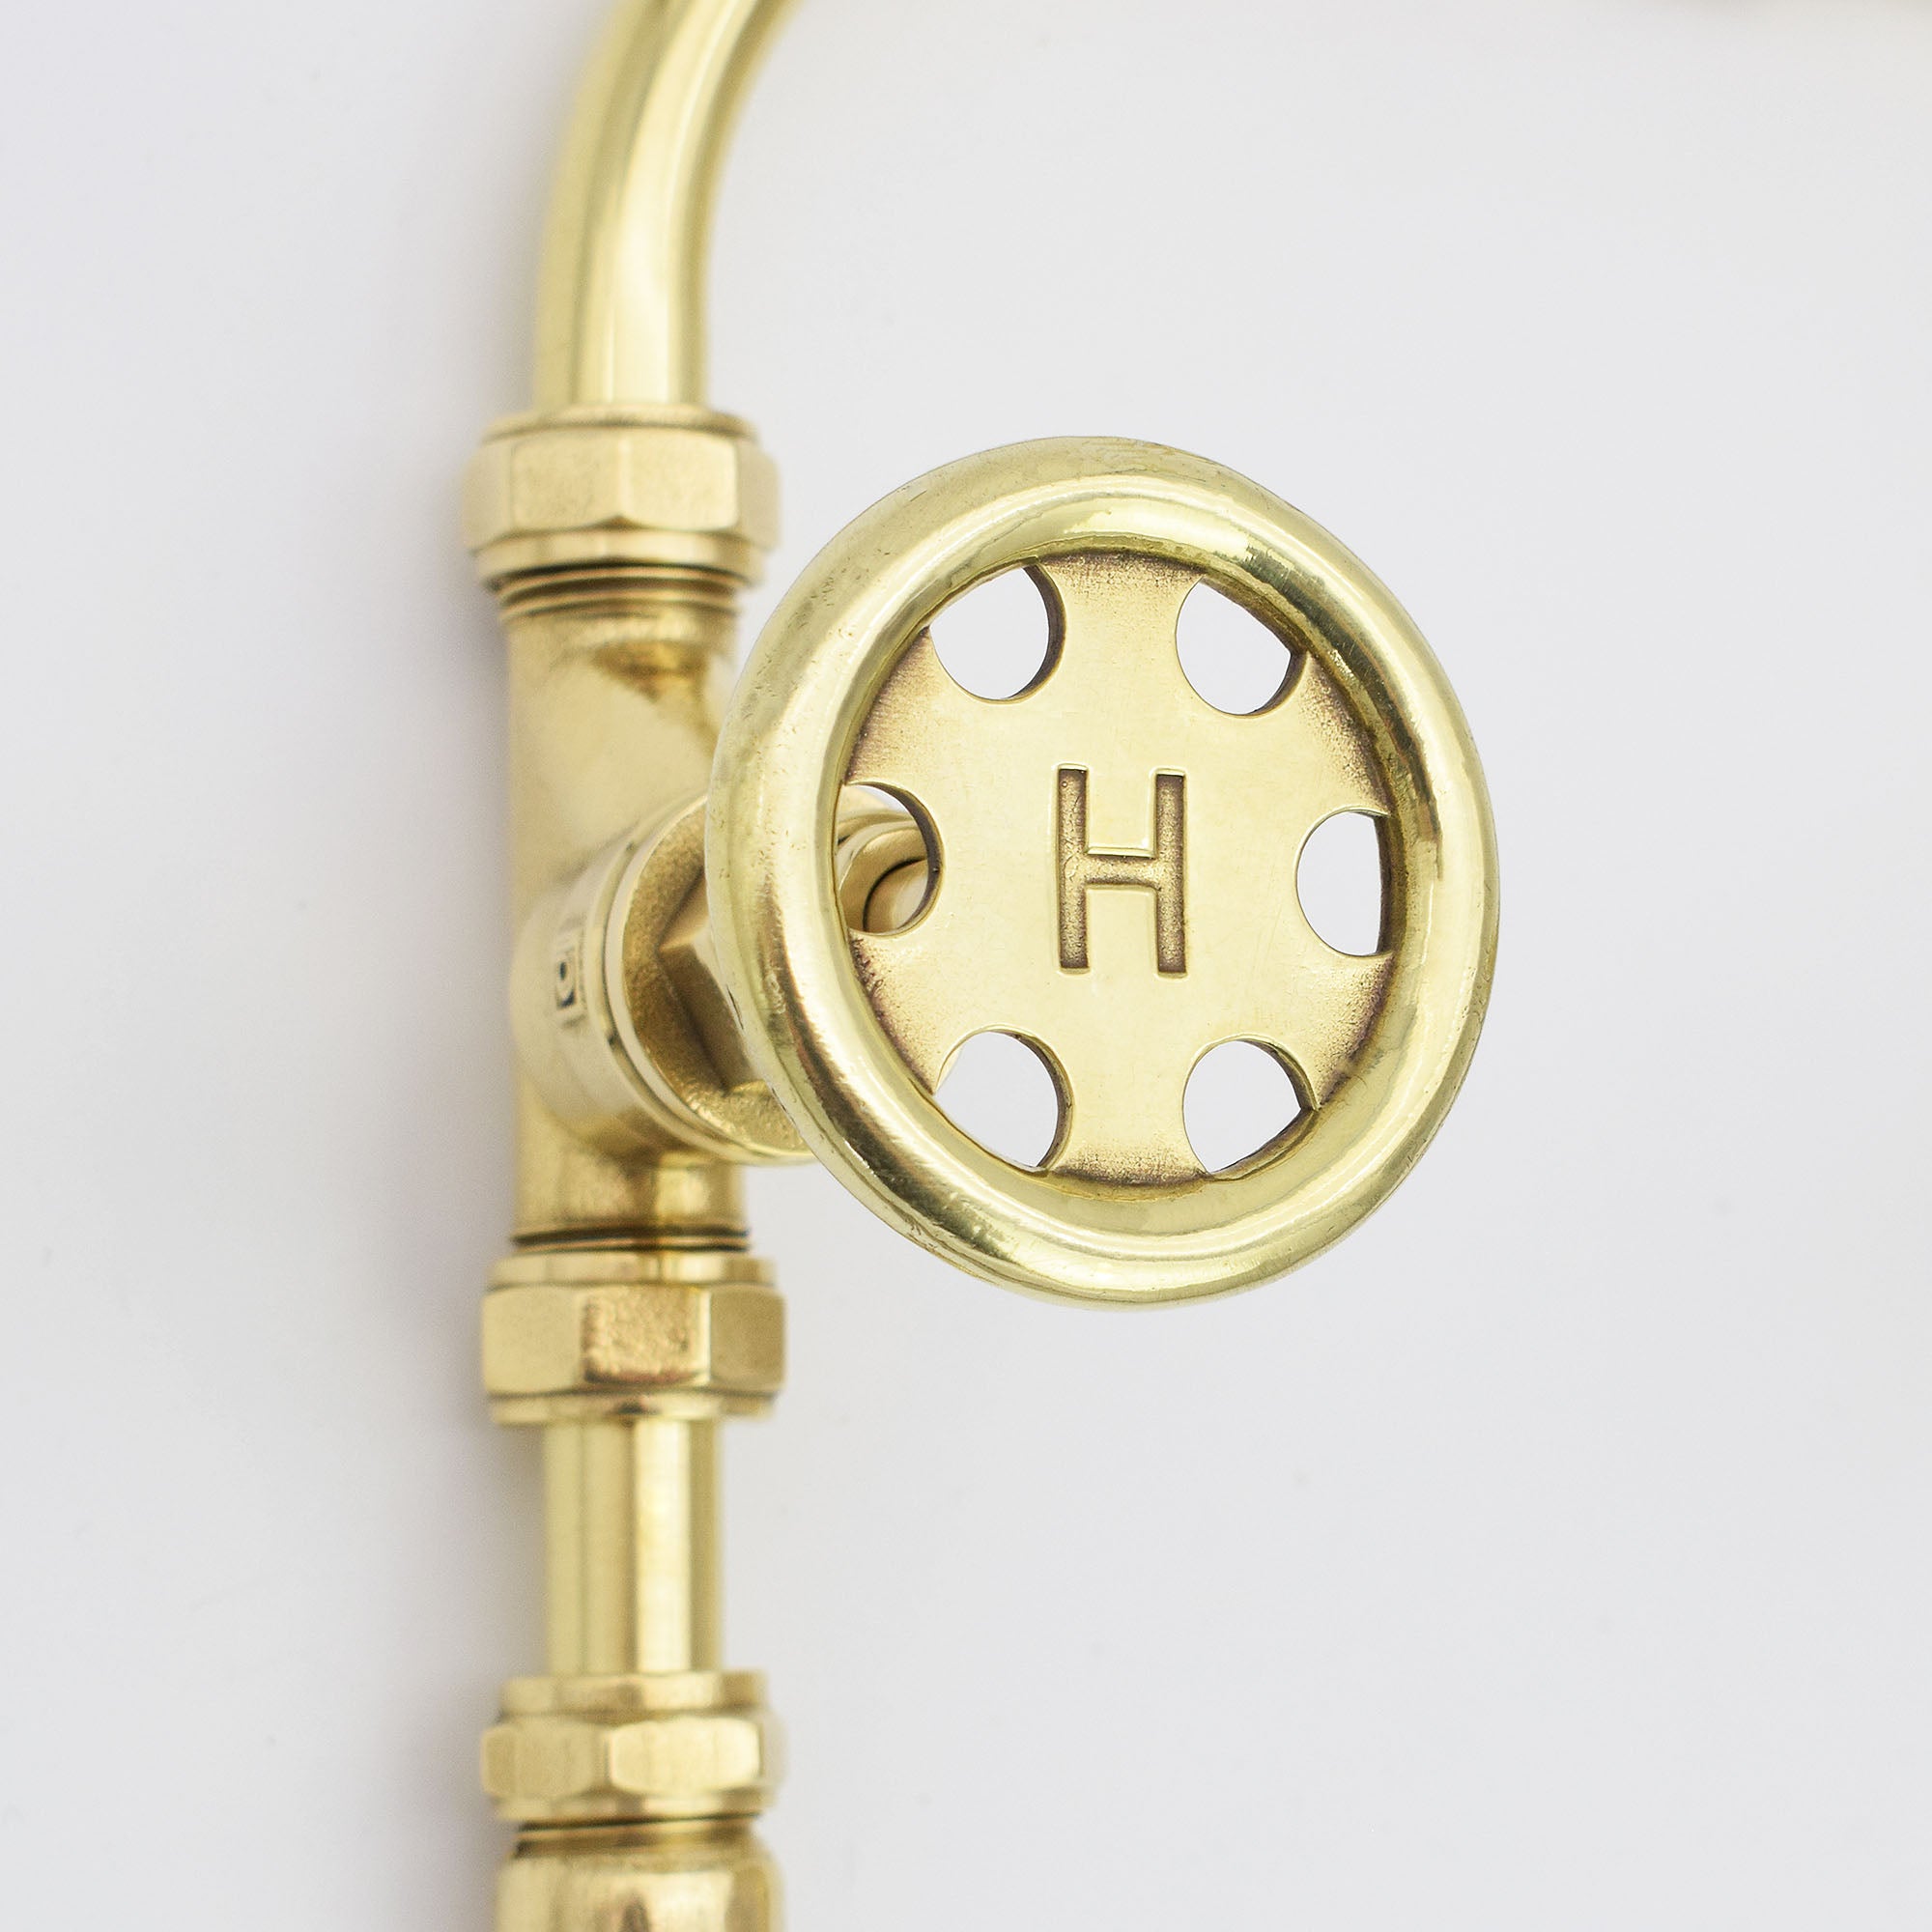 customizable brass taps available in our Brighton Showroom or contact us online via our online store